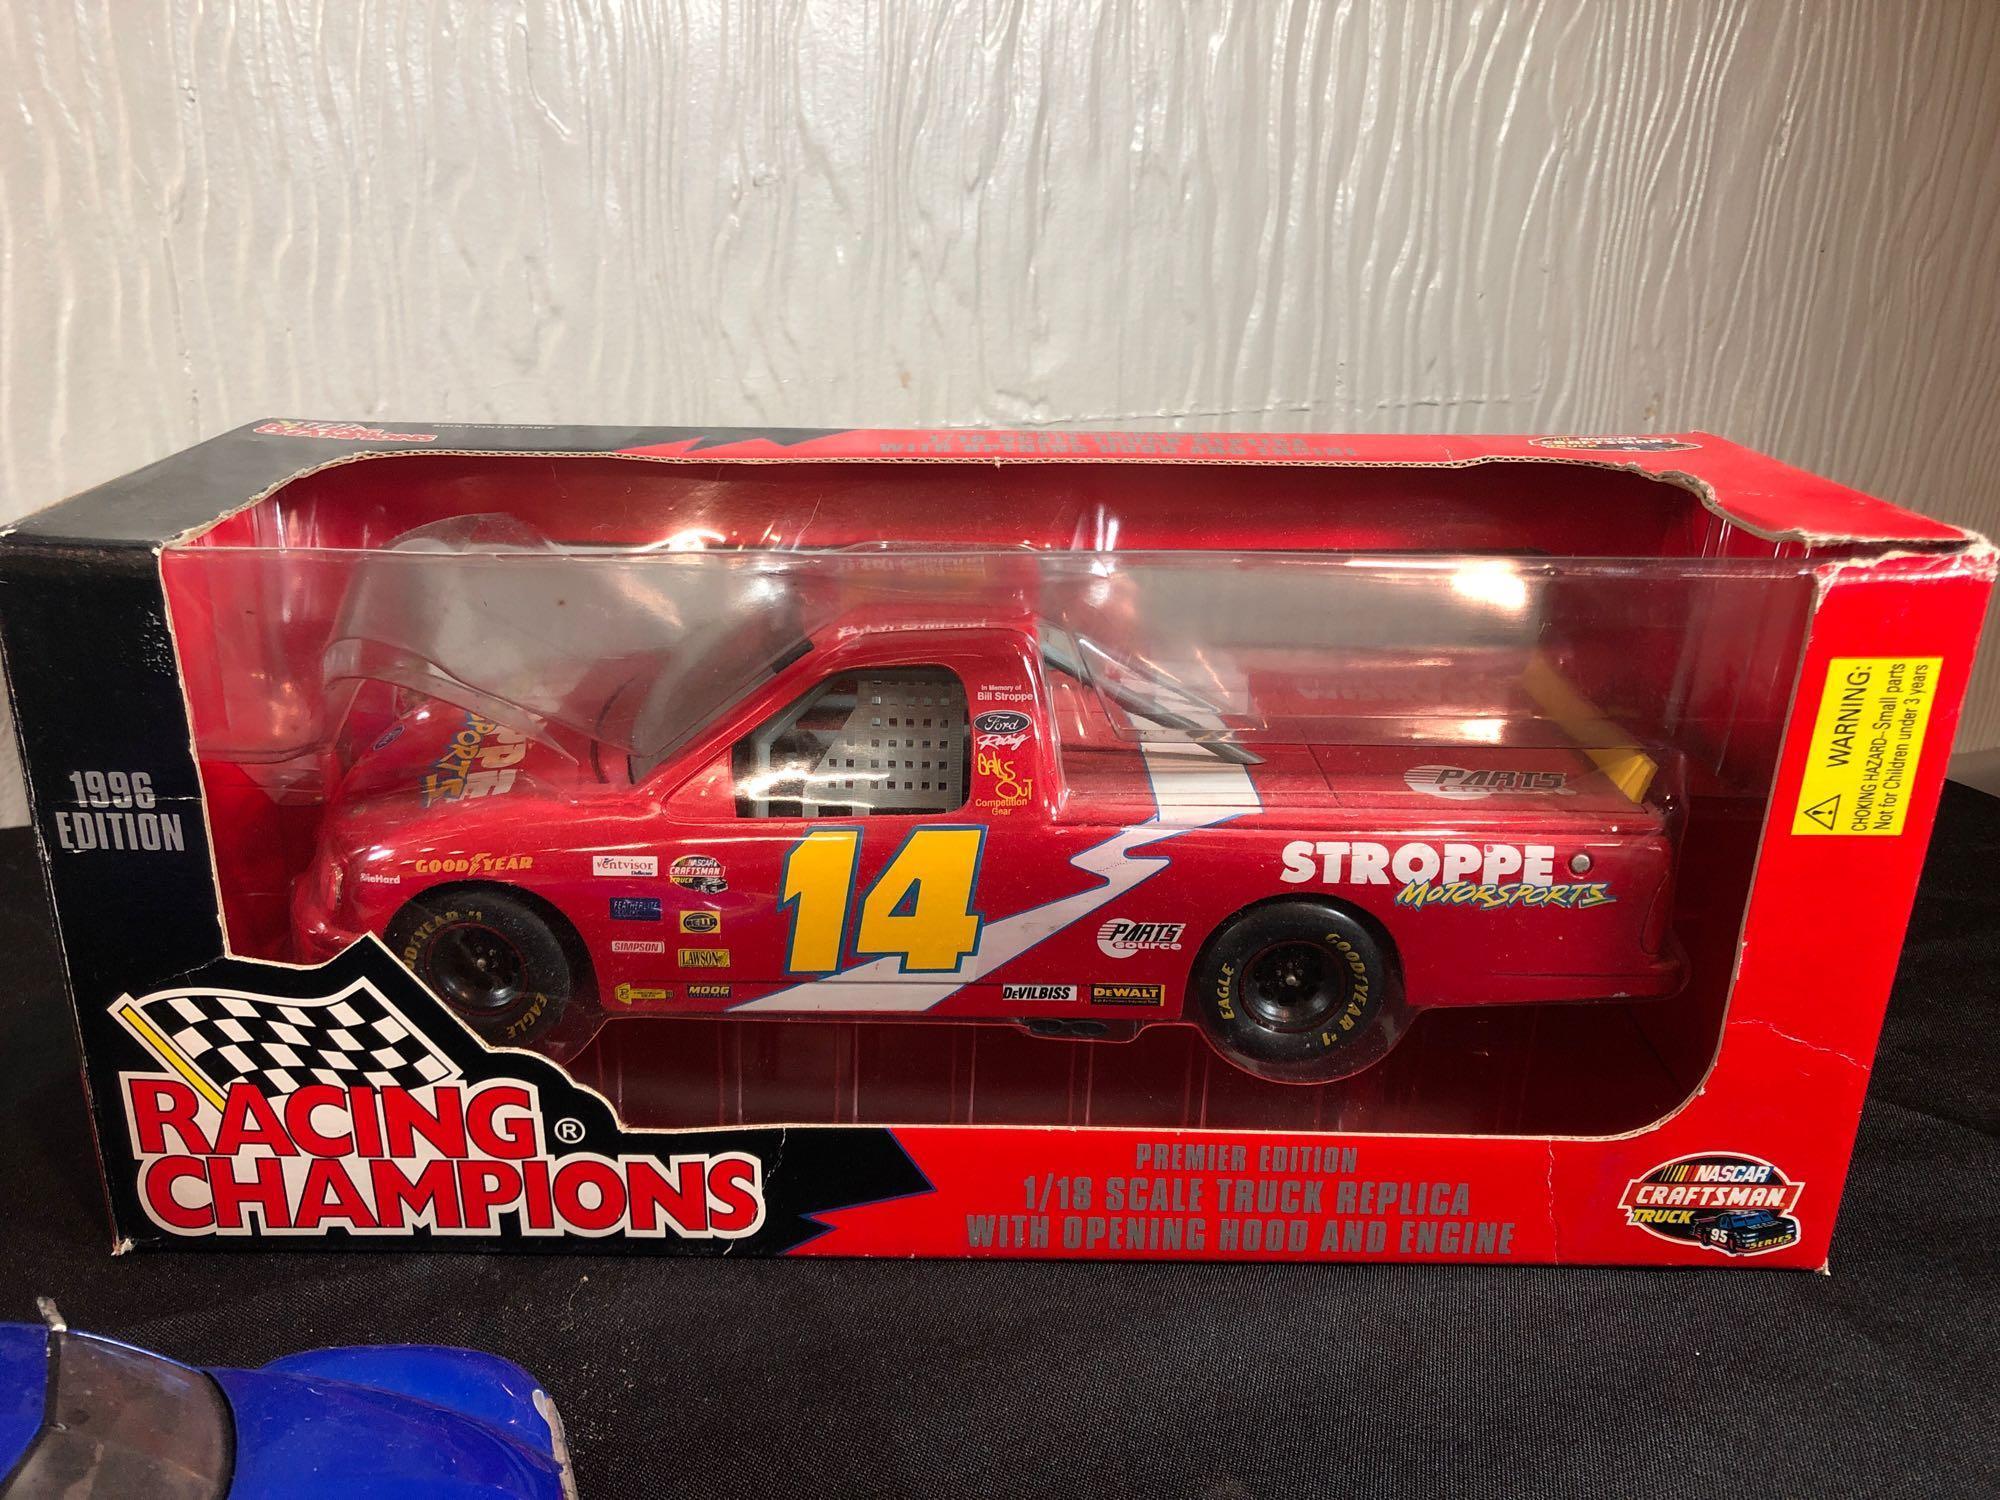 Racing Champions 1/18 Craftsman Truck, Muscle Machines Die-Cast Cars